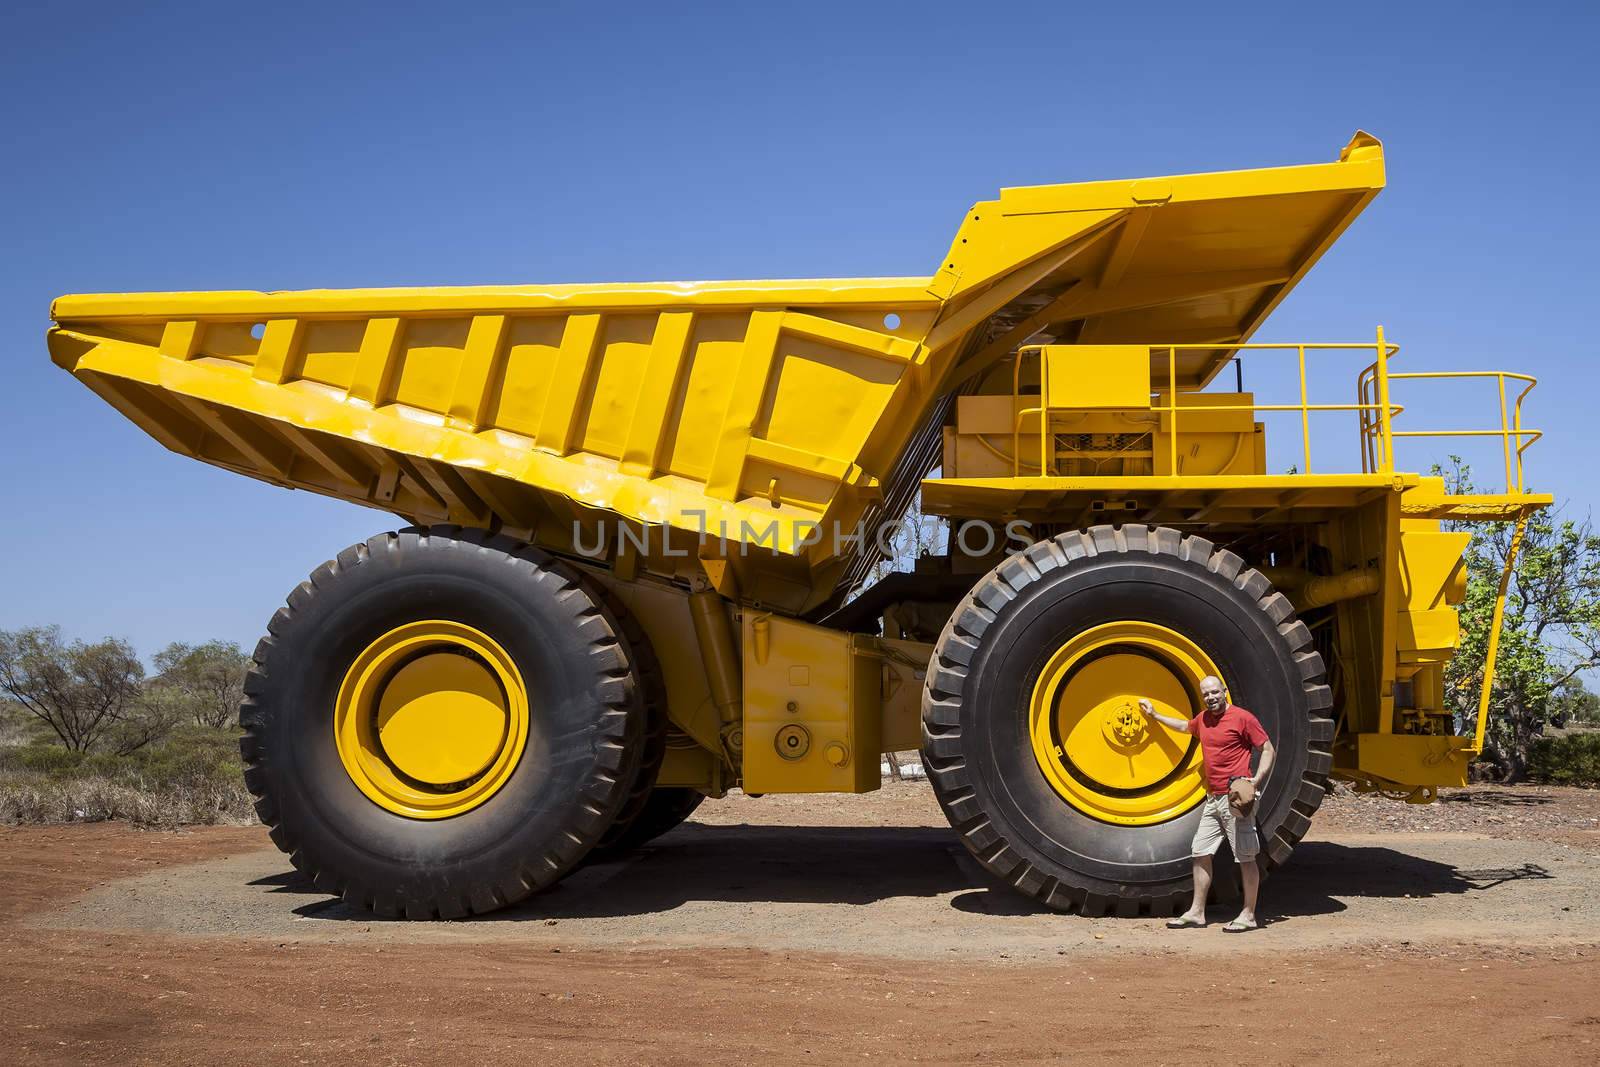 An image of a big yellow transporter and a man in front of a wheel